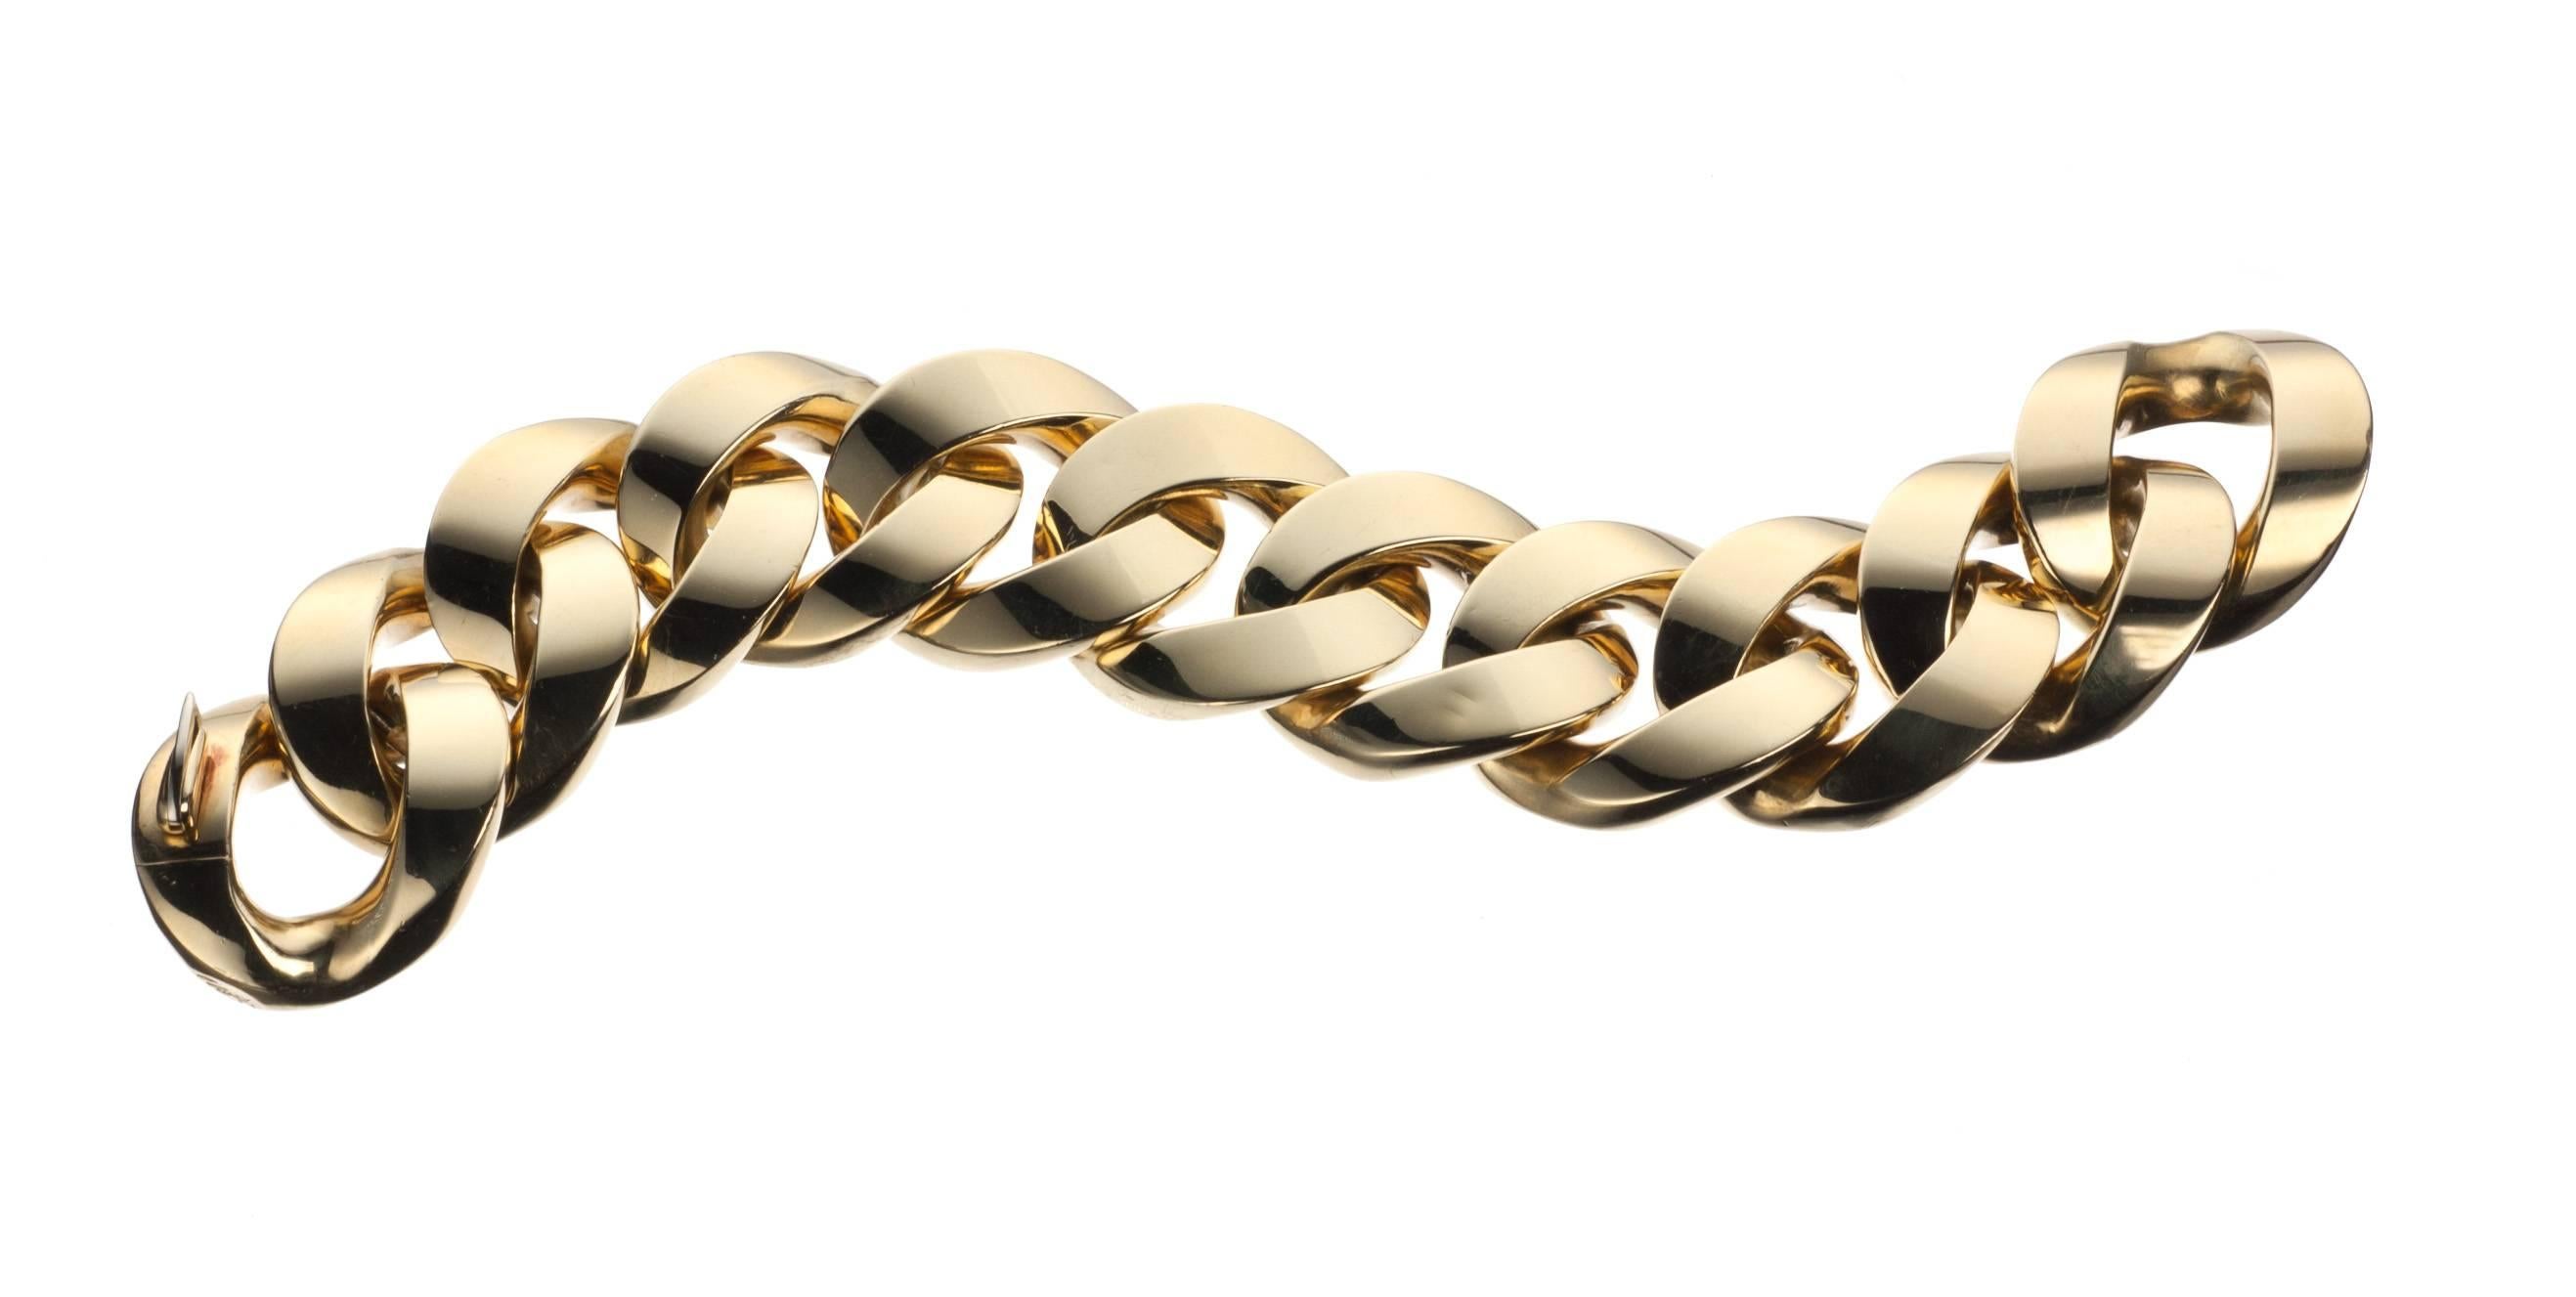 Bold and substantial in its presence, an 18-karat yellow gold curb link bracelet. With links approx. 1” wide and 0.25” deep, this is a bracelet bound to make an impression. Measures approx 7.5” in length. 